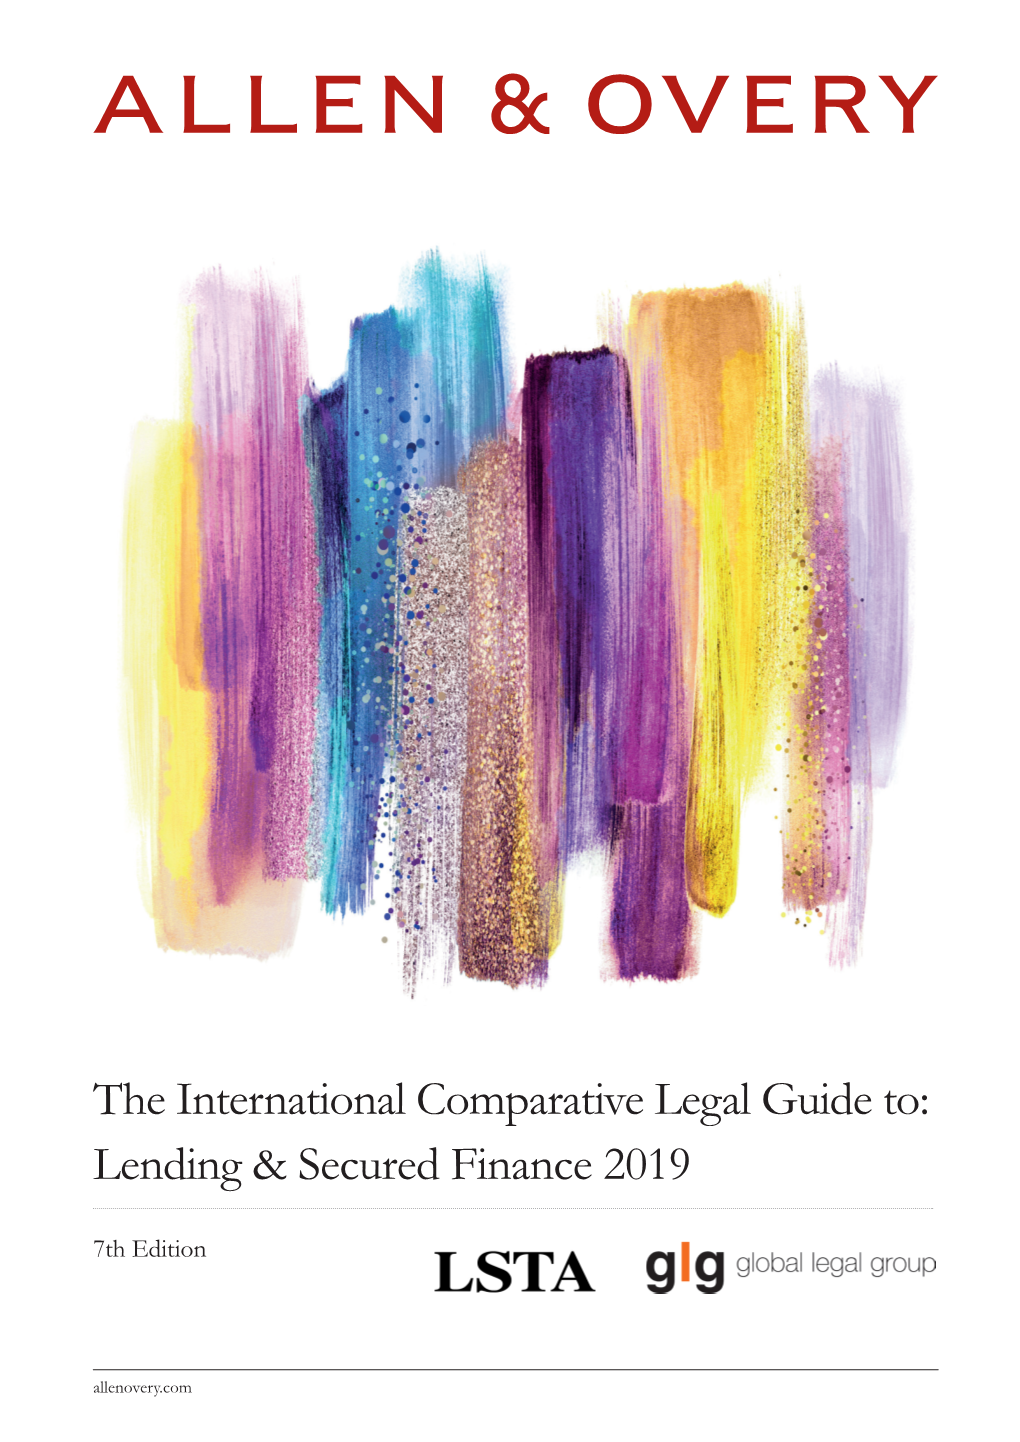 The International Comparative Legal Guide To: Lending & Secured Finance 2019